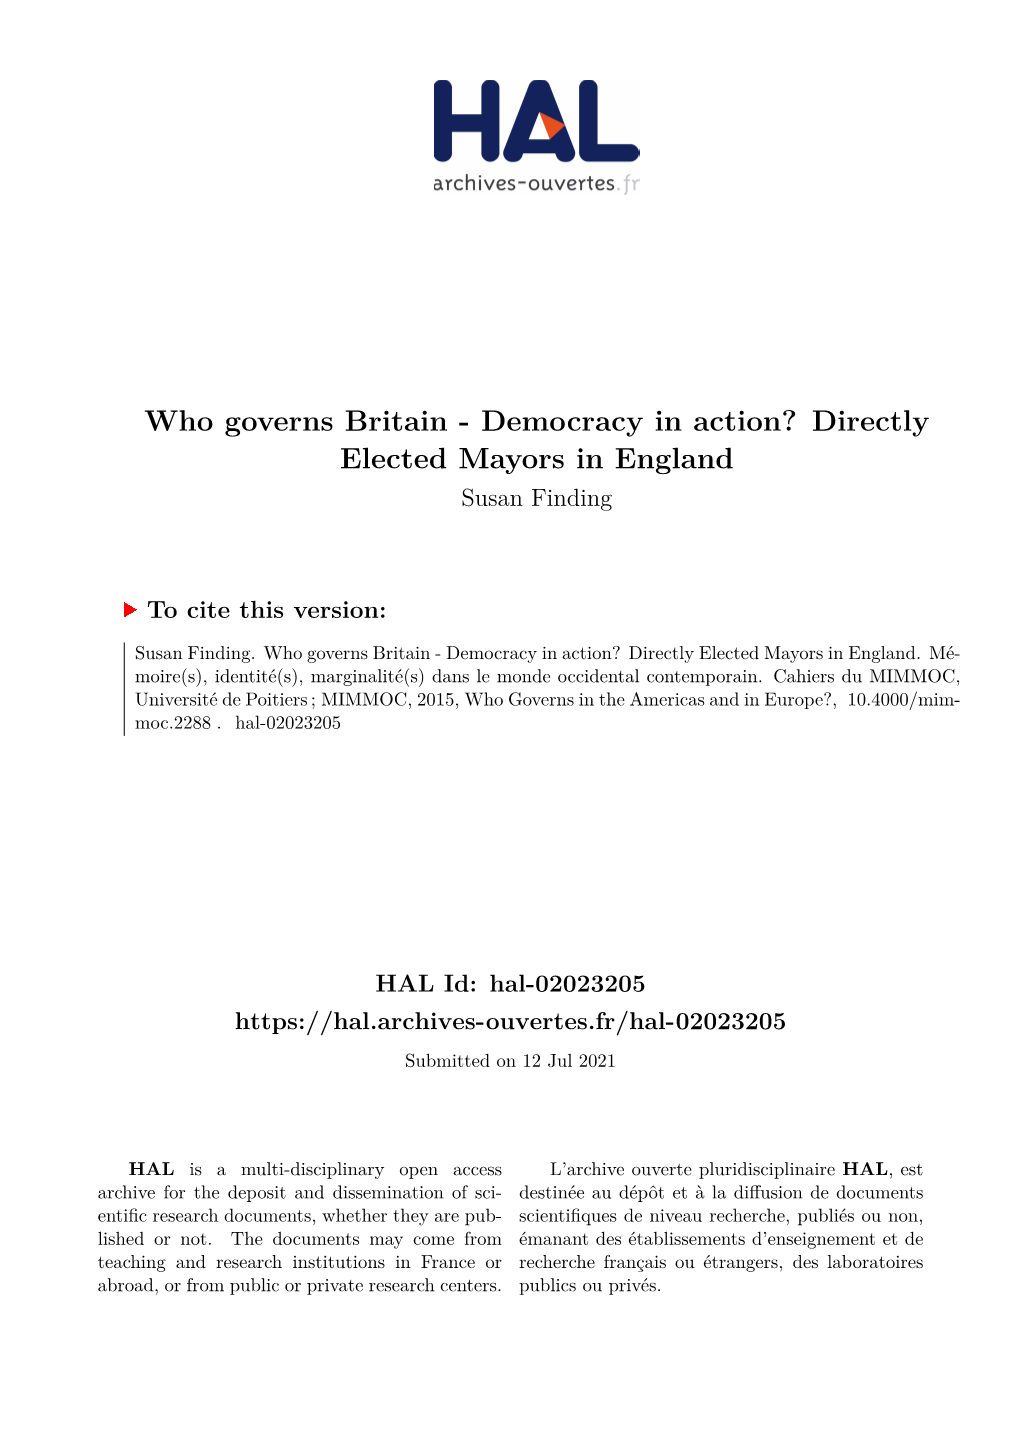 Who Governs Britain - Democracy in Action? Directly Elected Mayors in England Susan Finding